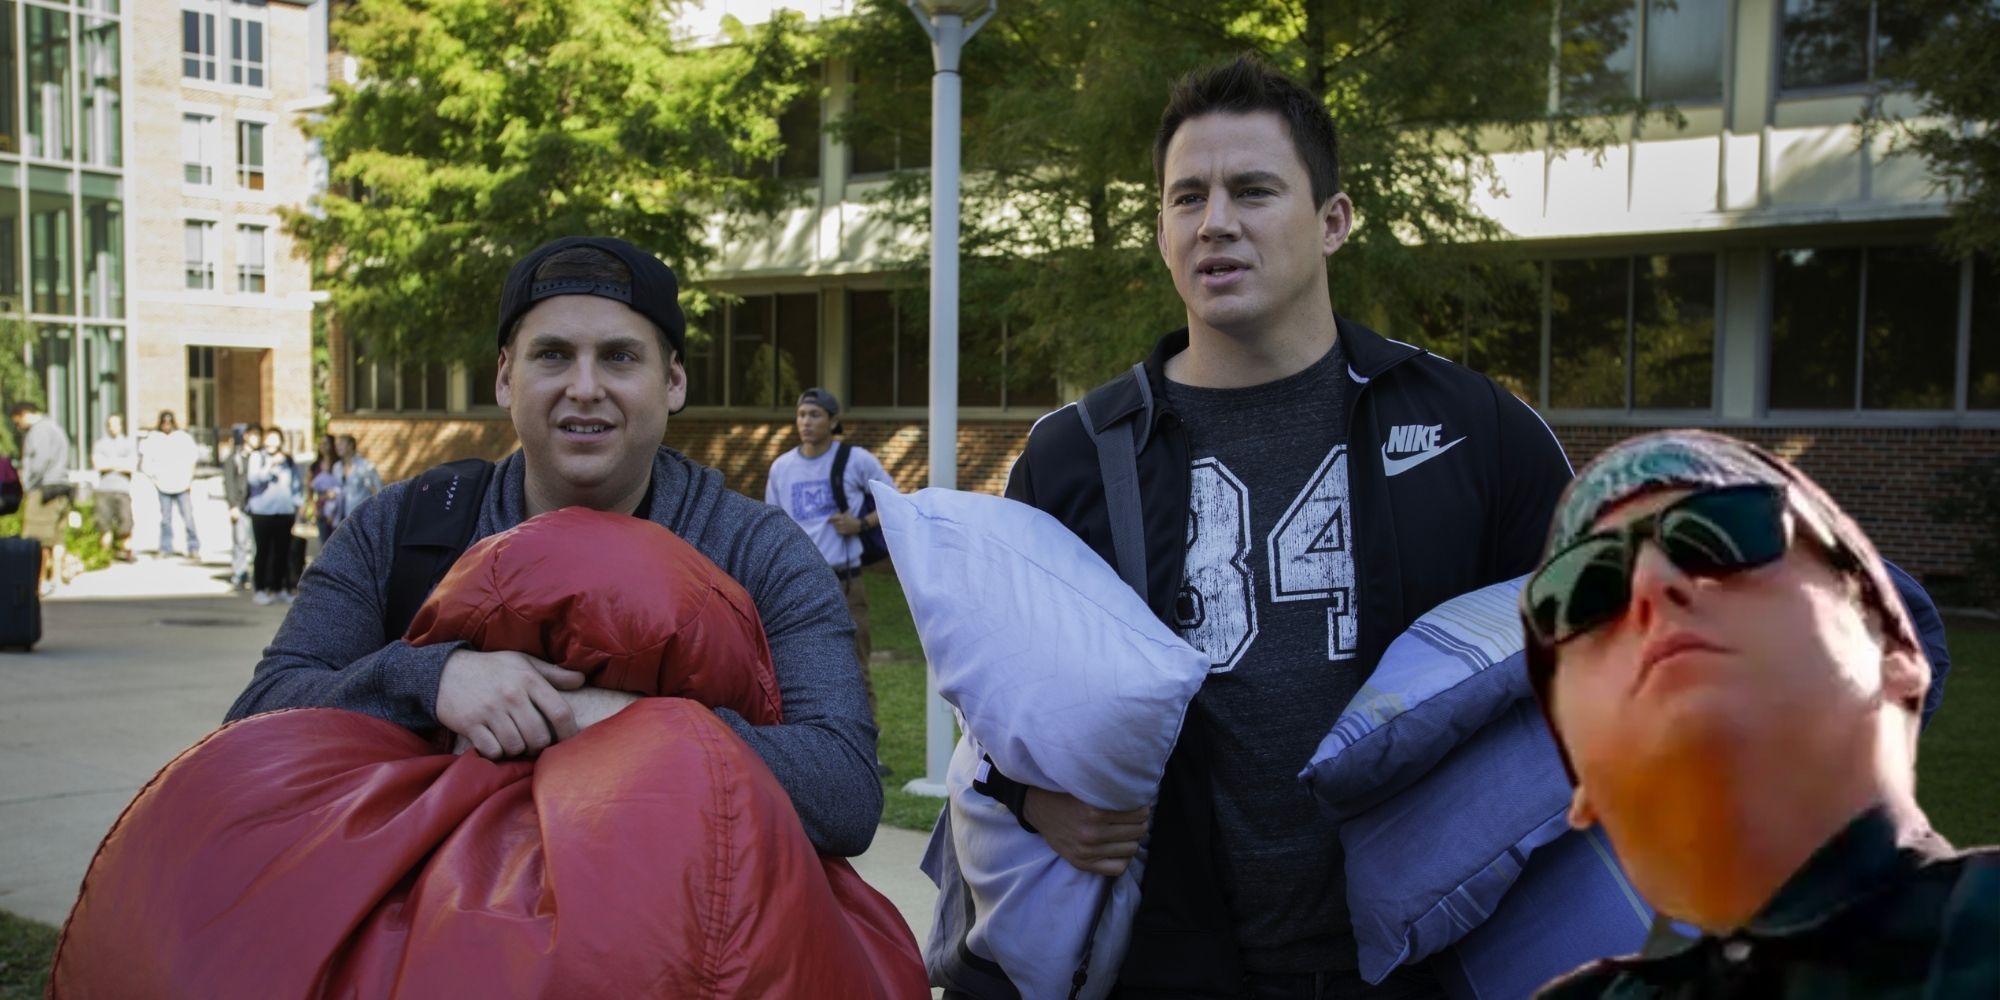 22 Jump Street Jonah Hill and Channing Tatum on the college campus and Jonah wearing a bandana and sunglasses looking tough